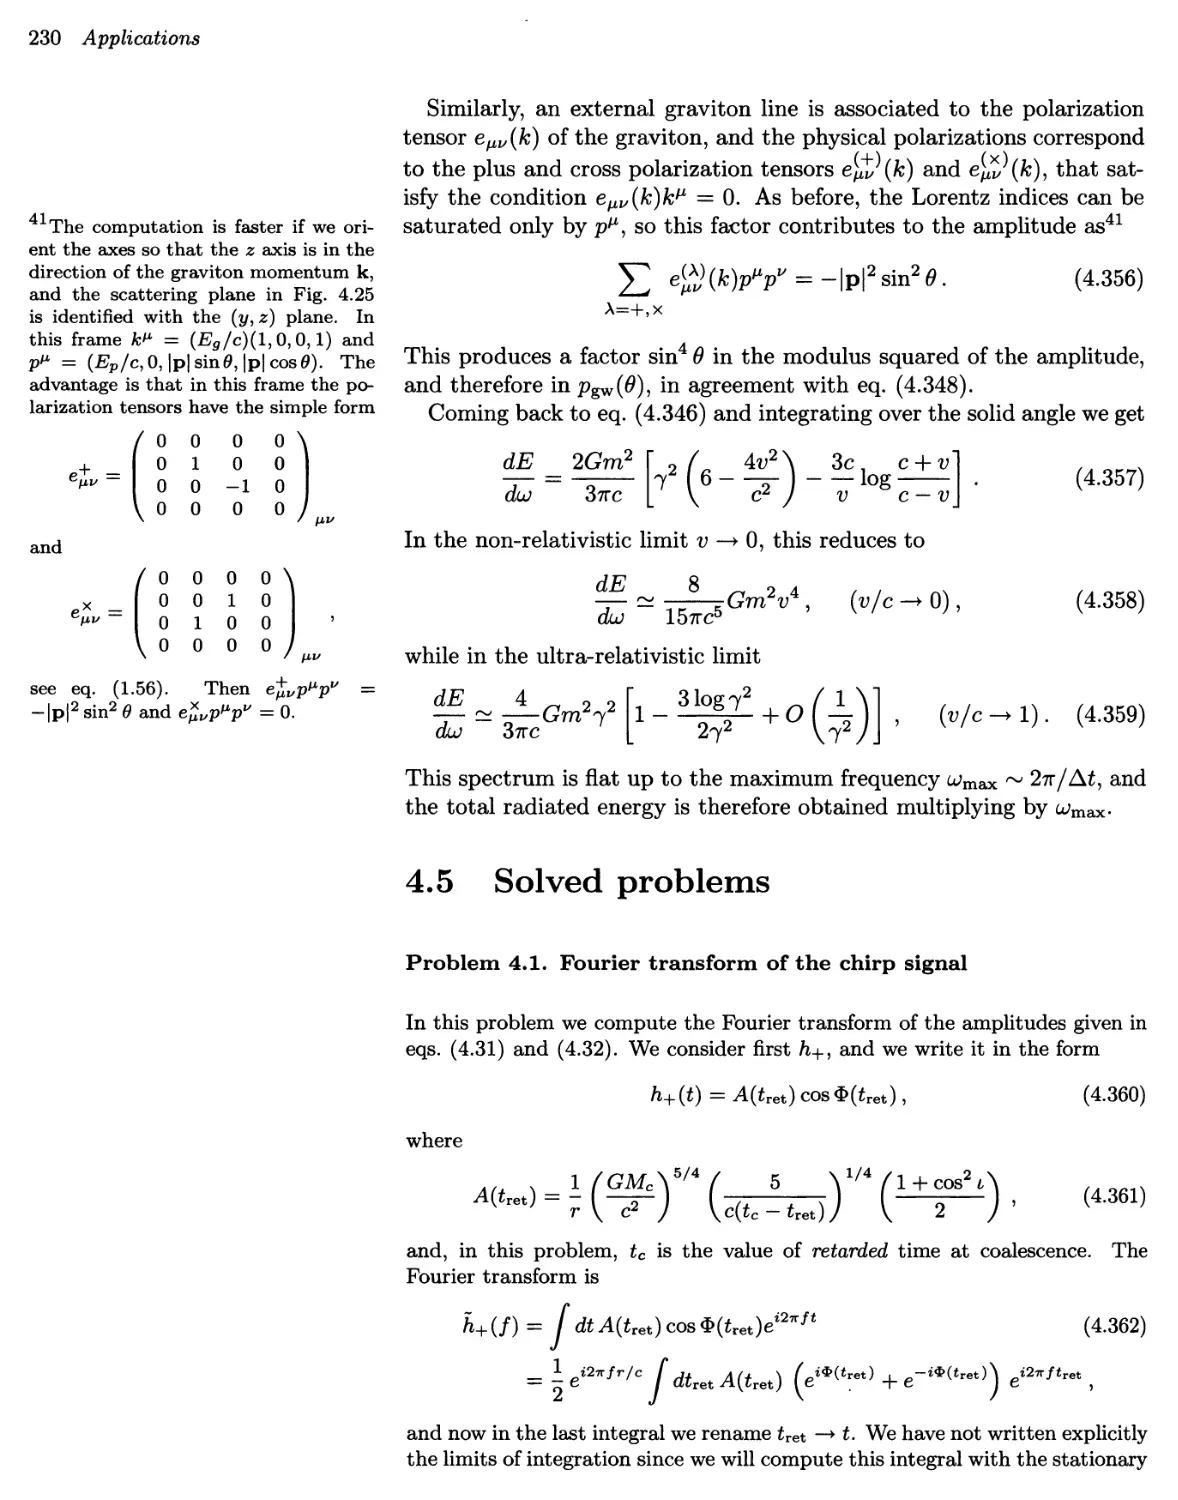 4.5 Solved problems 230